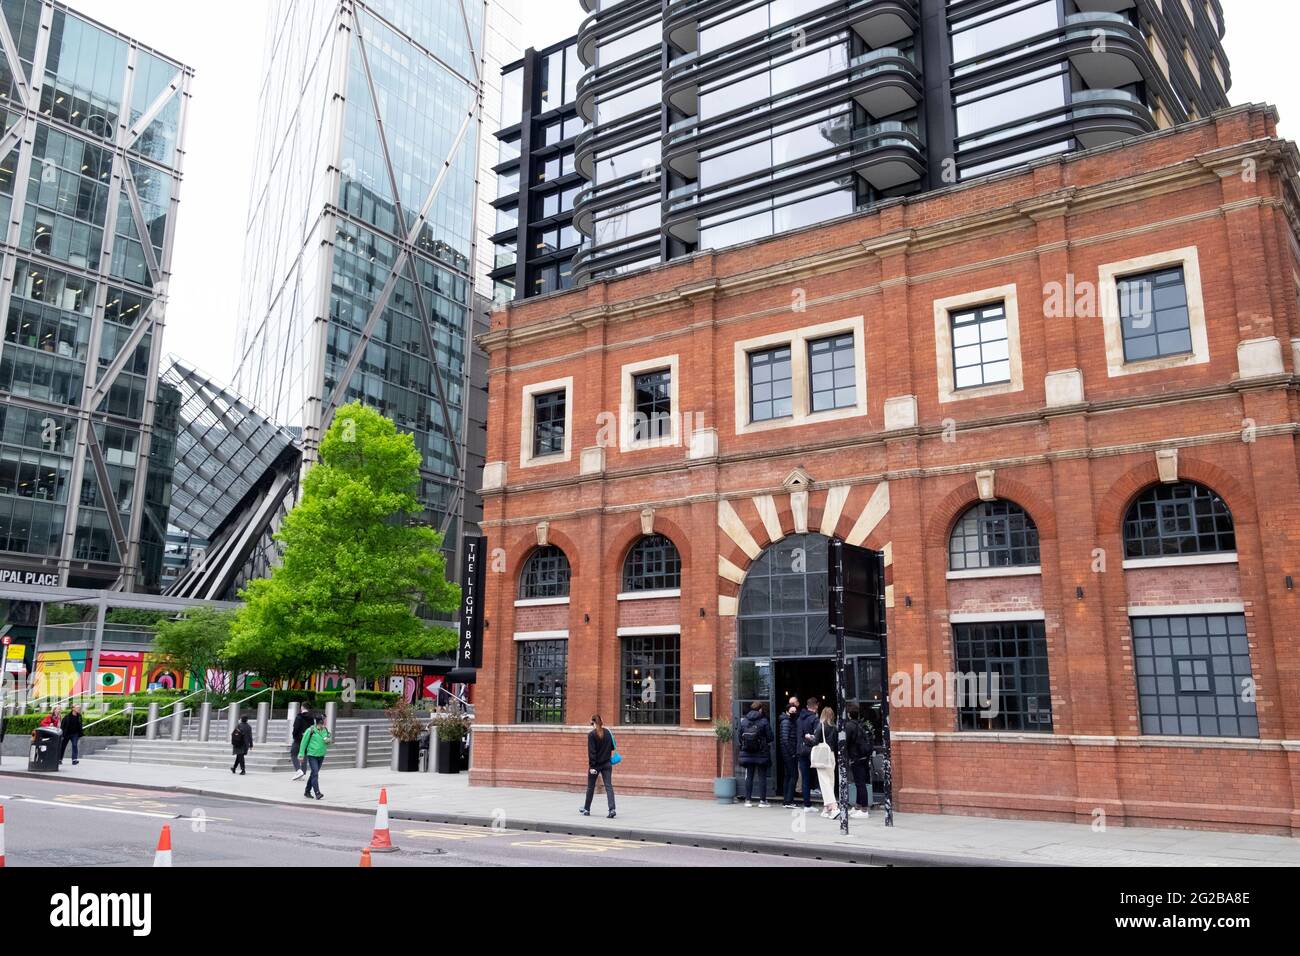 People at the entrance of The Light Bar at the old 1893 Victorian Norton Folgate Power Station in Bishopsgate East London EC2 England UK  KATHY DEWITT Stock Photo